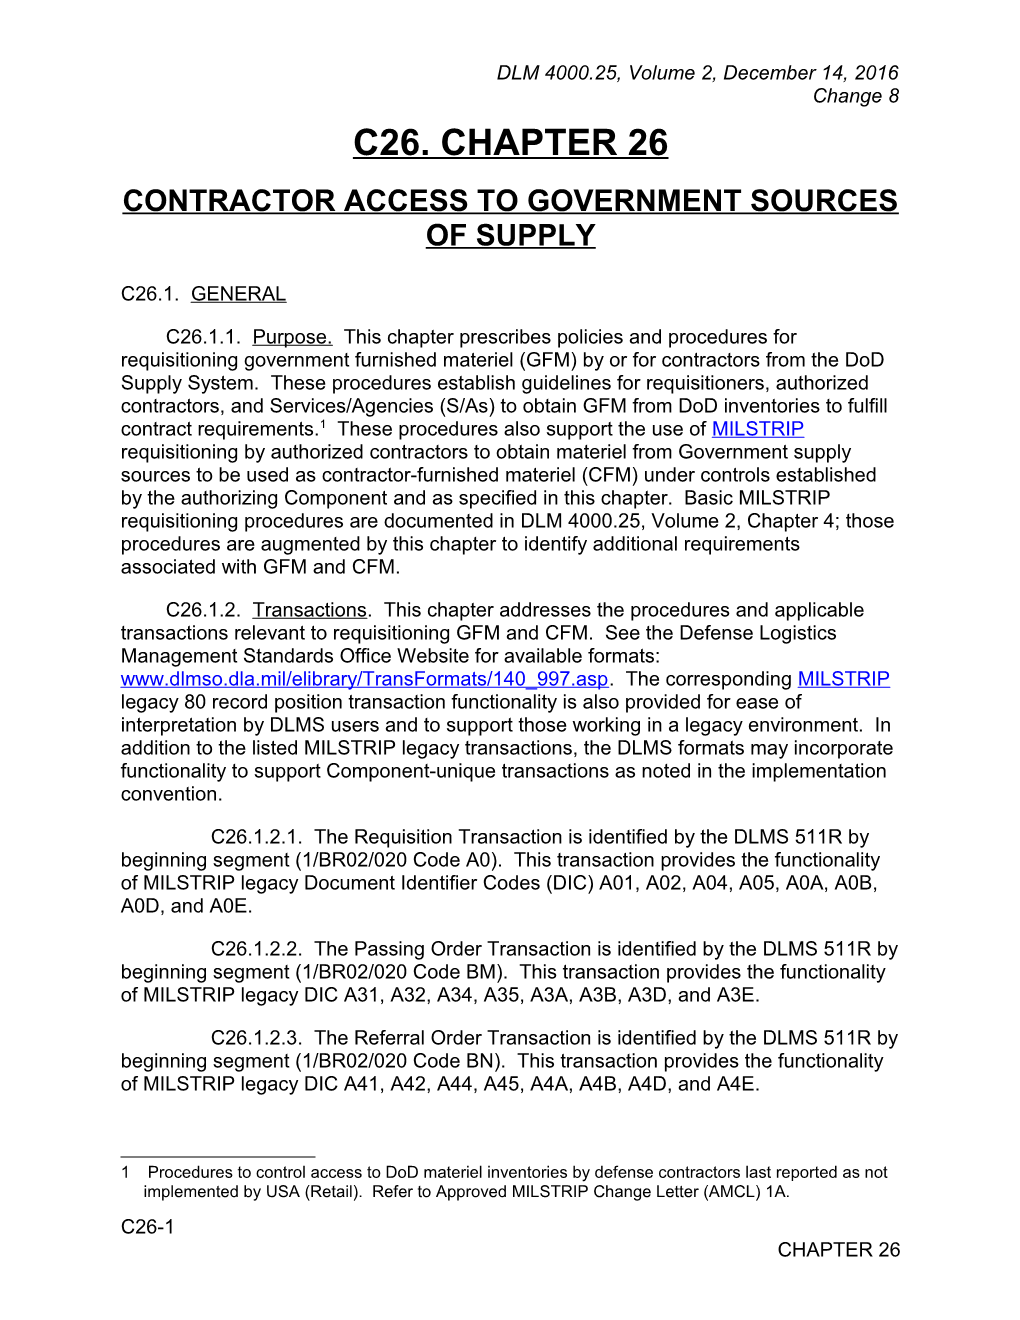 Chapter 26 - Contractor Access to Government Sources of Supply